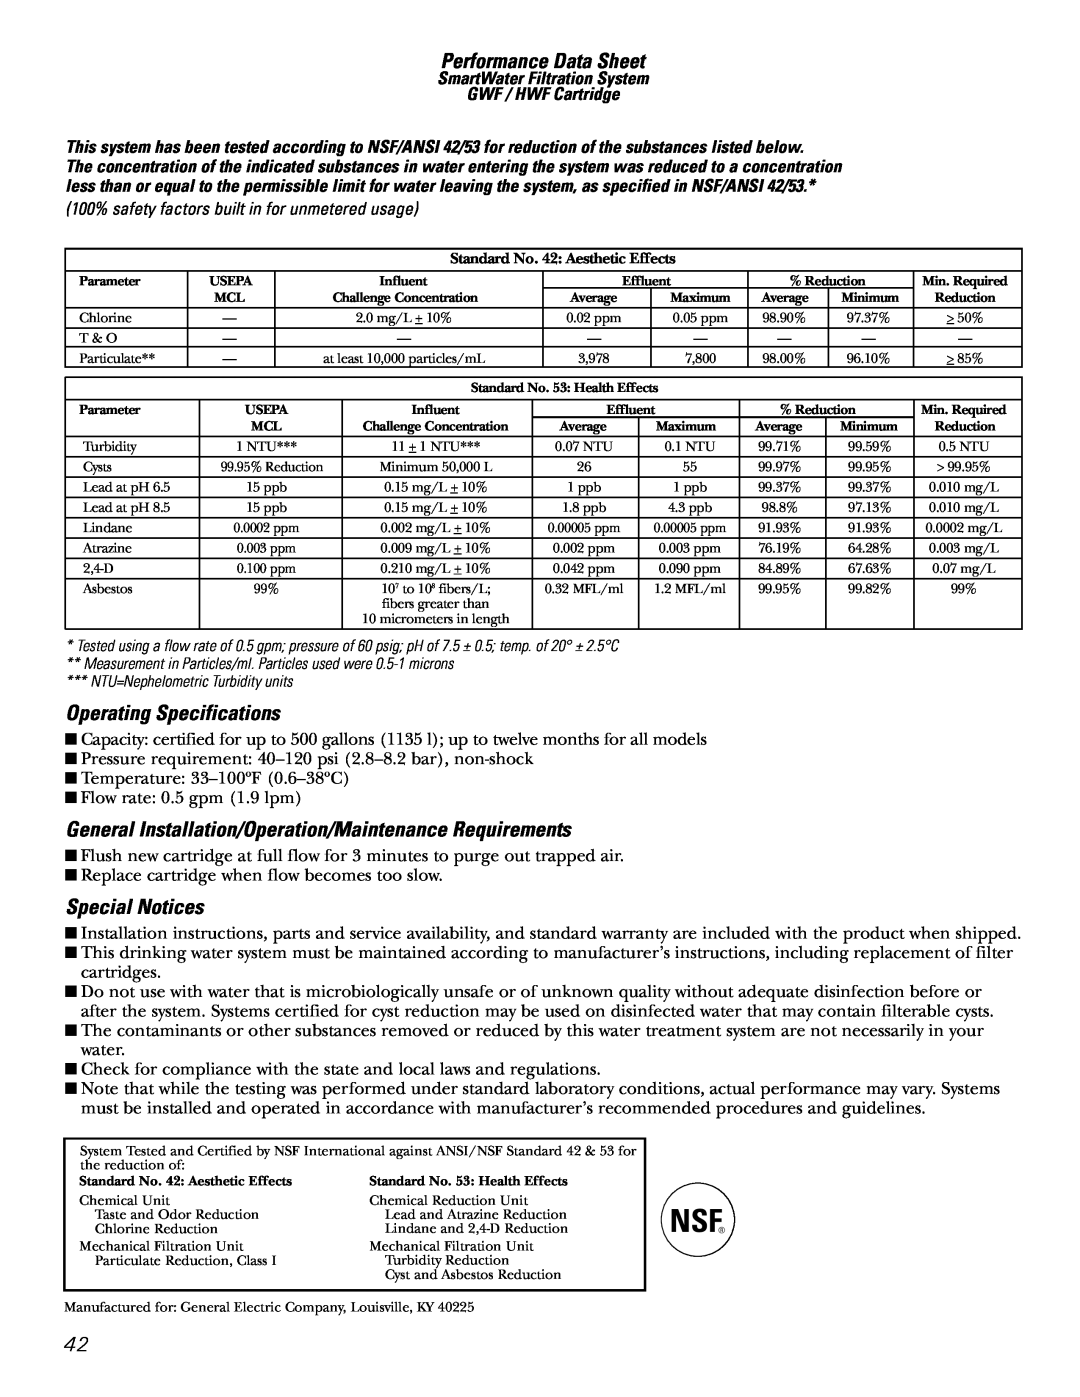 GE 42, 48 Performance Data Sheet, Operating Specifications, General Installation/Operation/Maintenance Requirements 